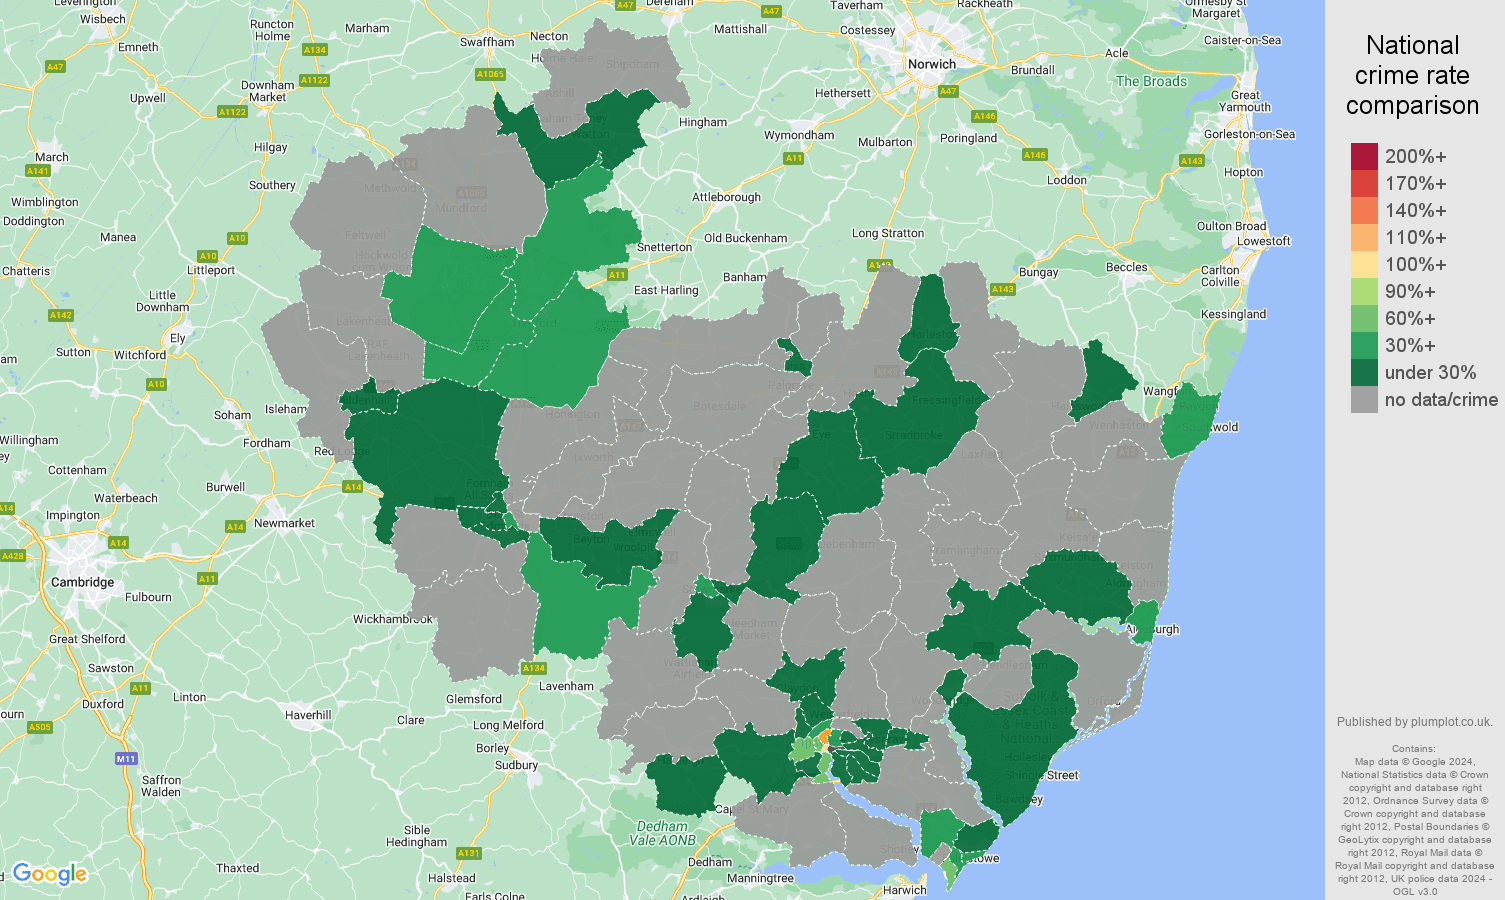 Ipswich robbery crime rate comparison map